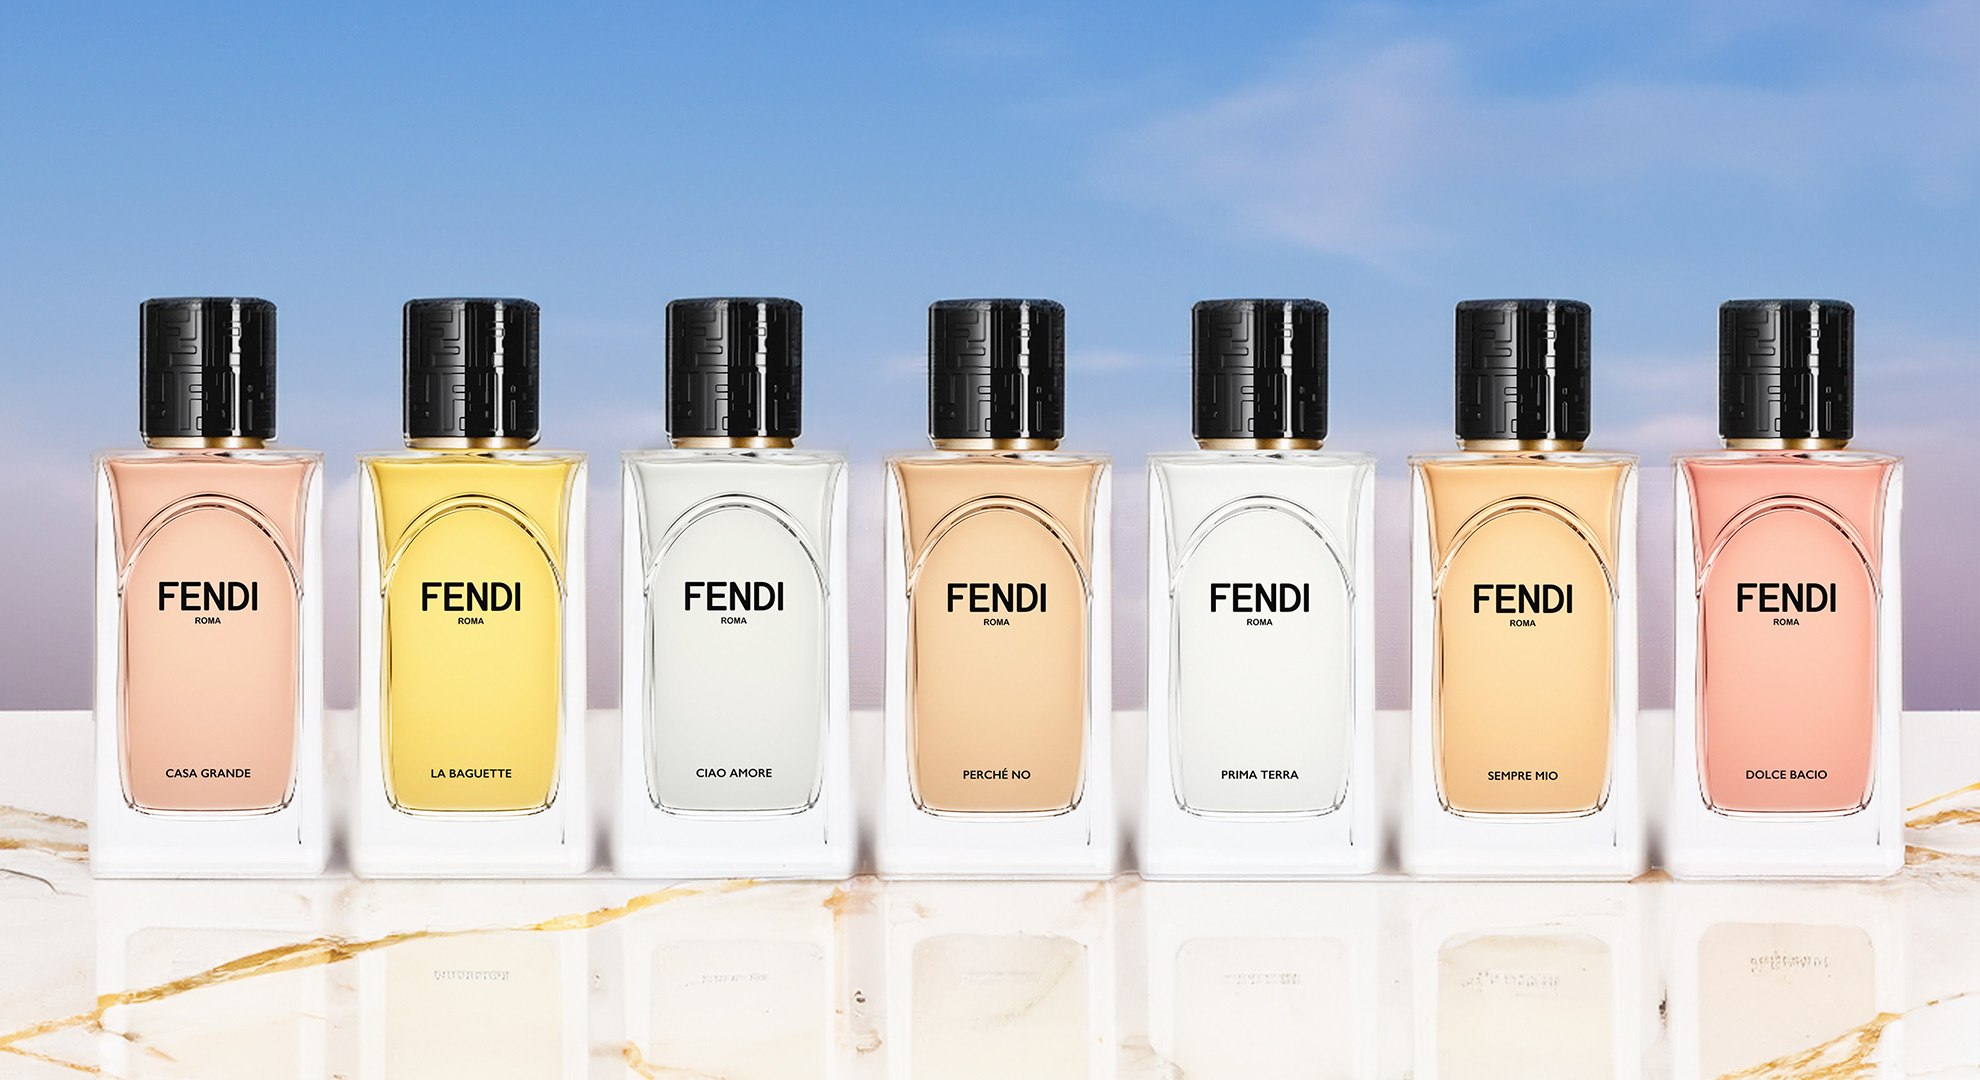 Fendi Launches a Luxury Perfume Collection Inspired by Its Family Members